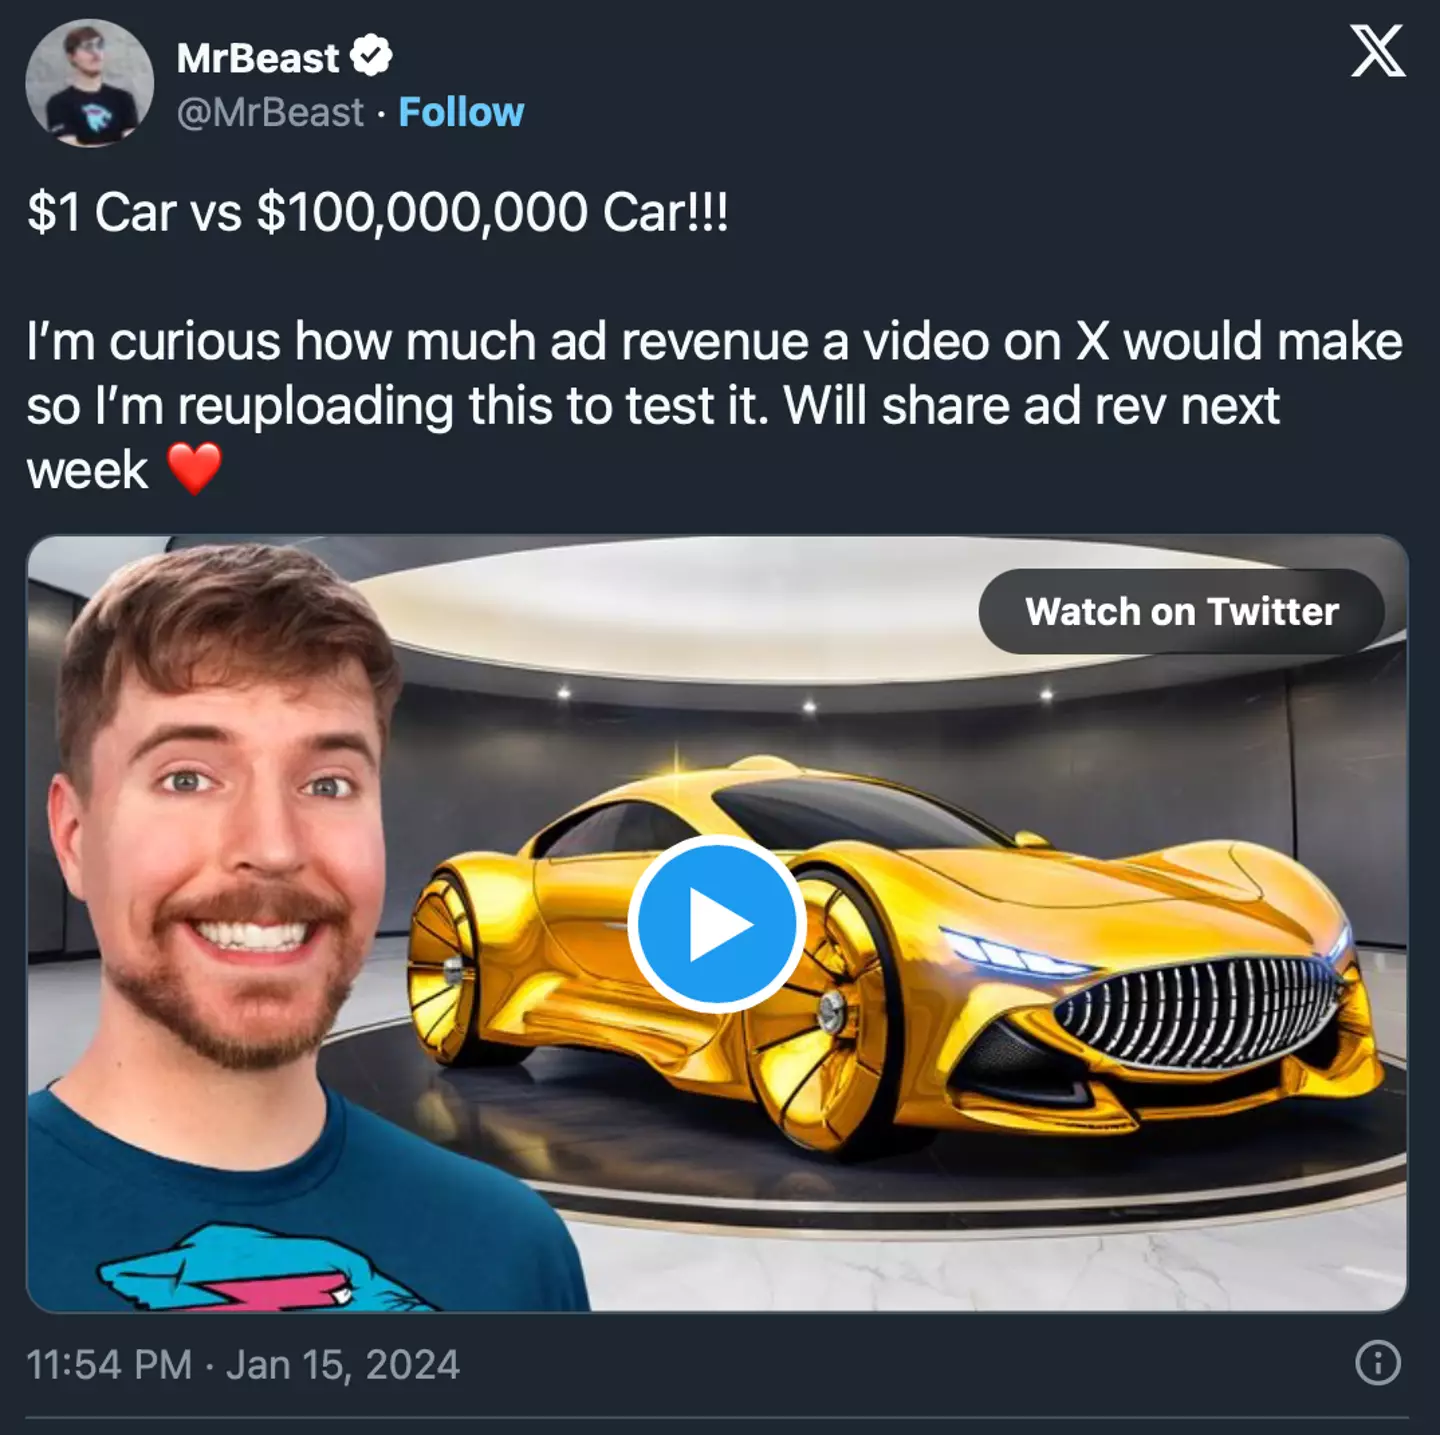 A full-length video from MrBeast is on YouTube now.